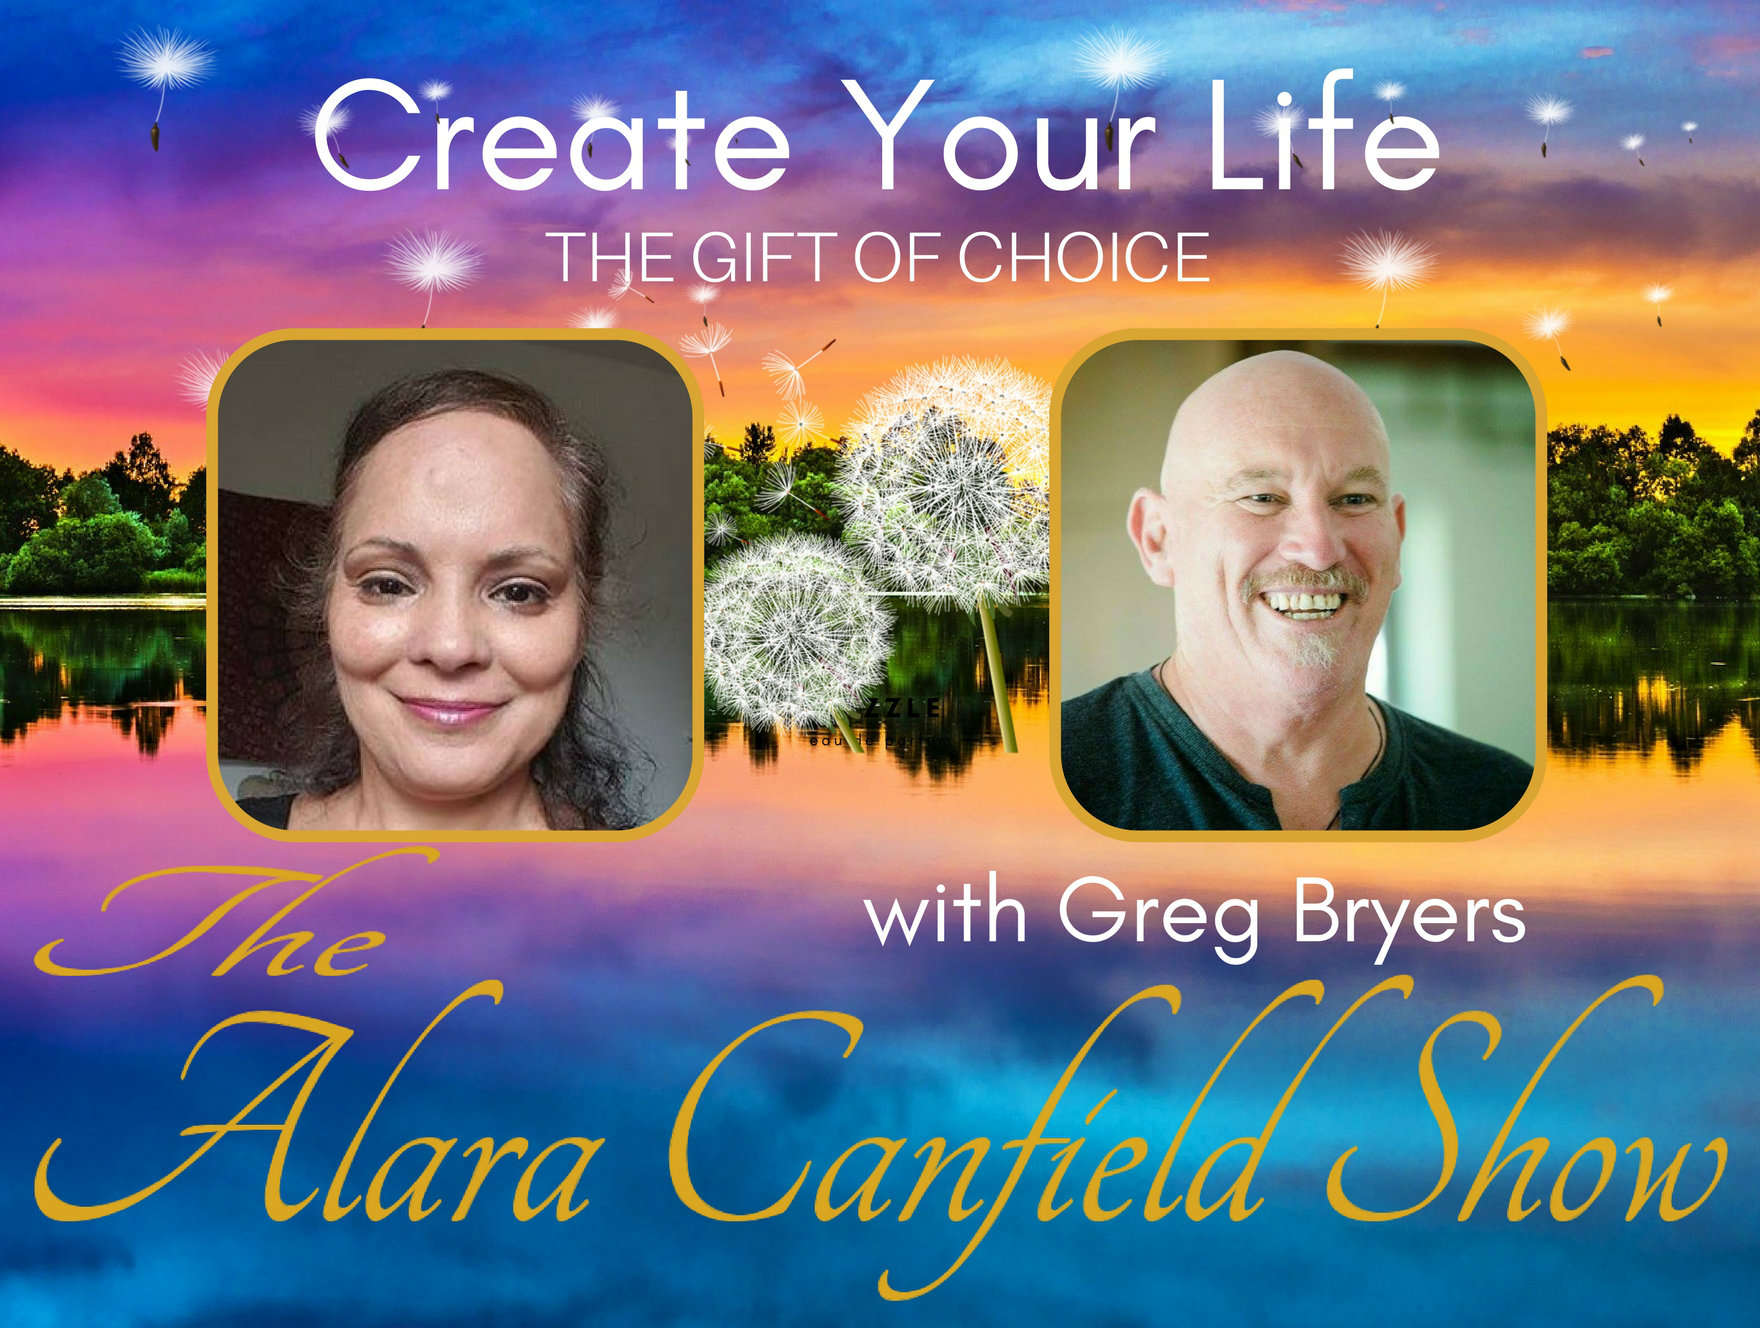 Create Your Life with Greg Bryers Jan 31 Podcast